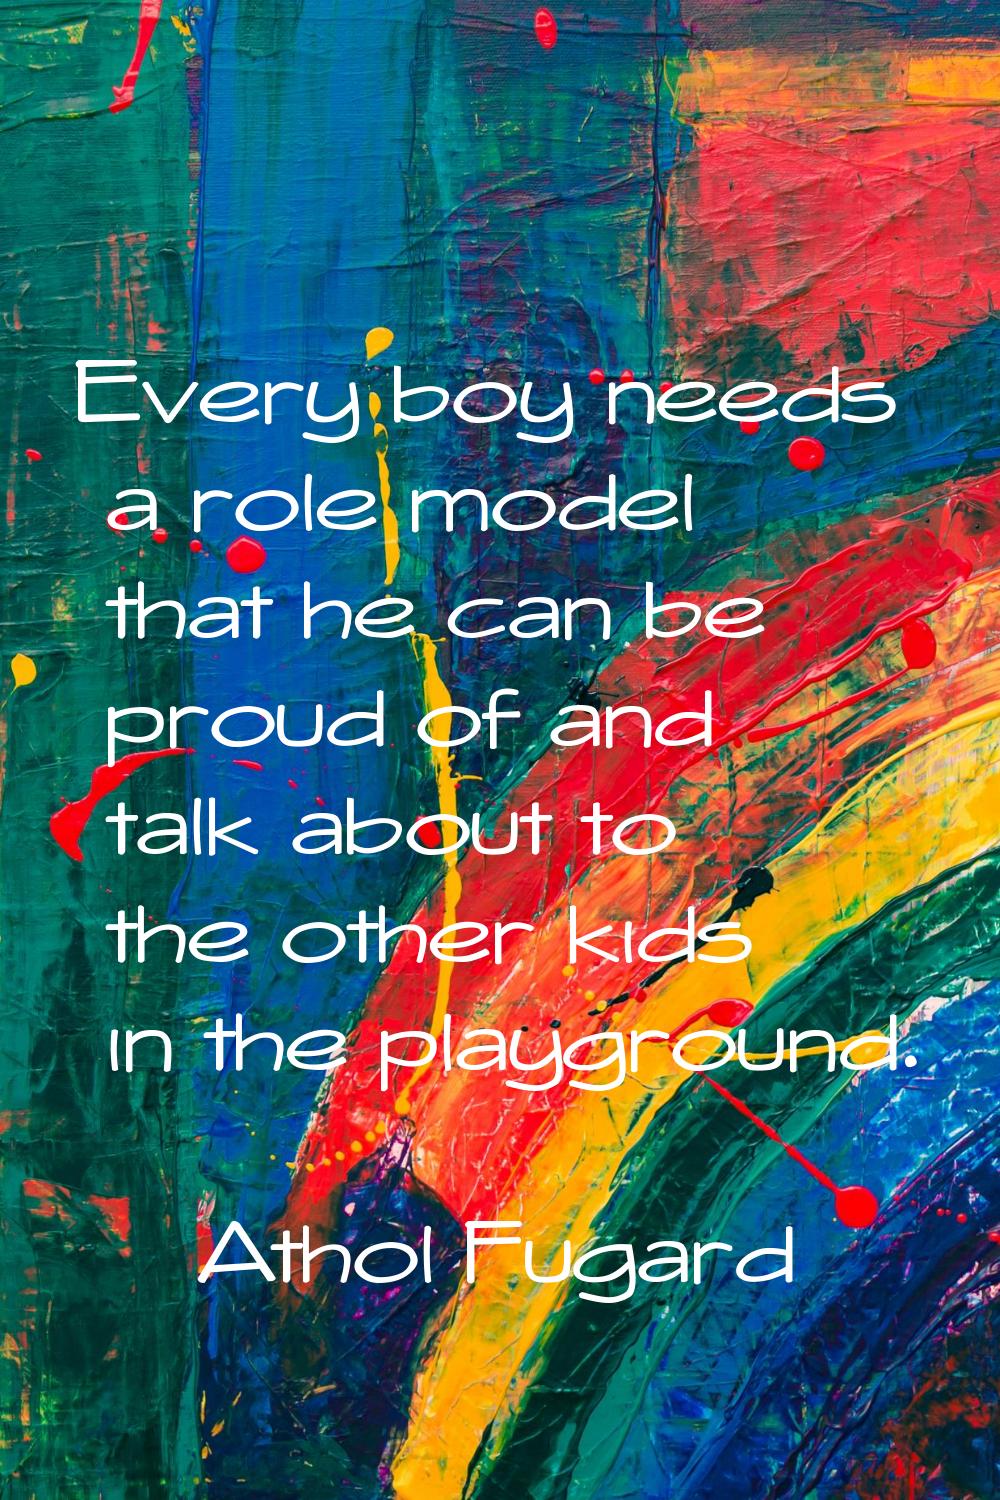 Every boy needs a role model that he can be proud of and talk about to the other kids in the playgr